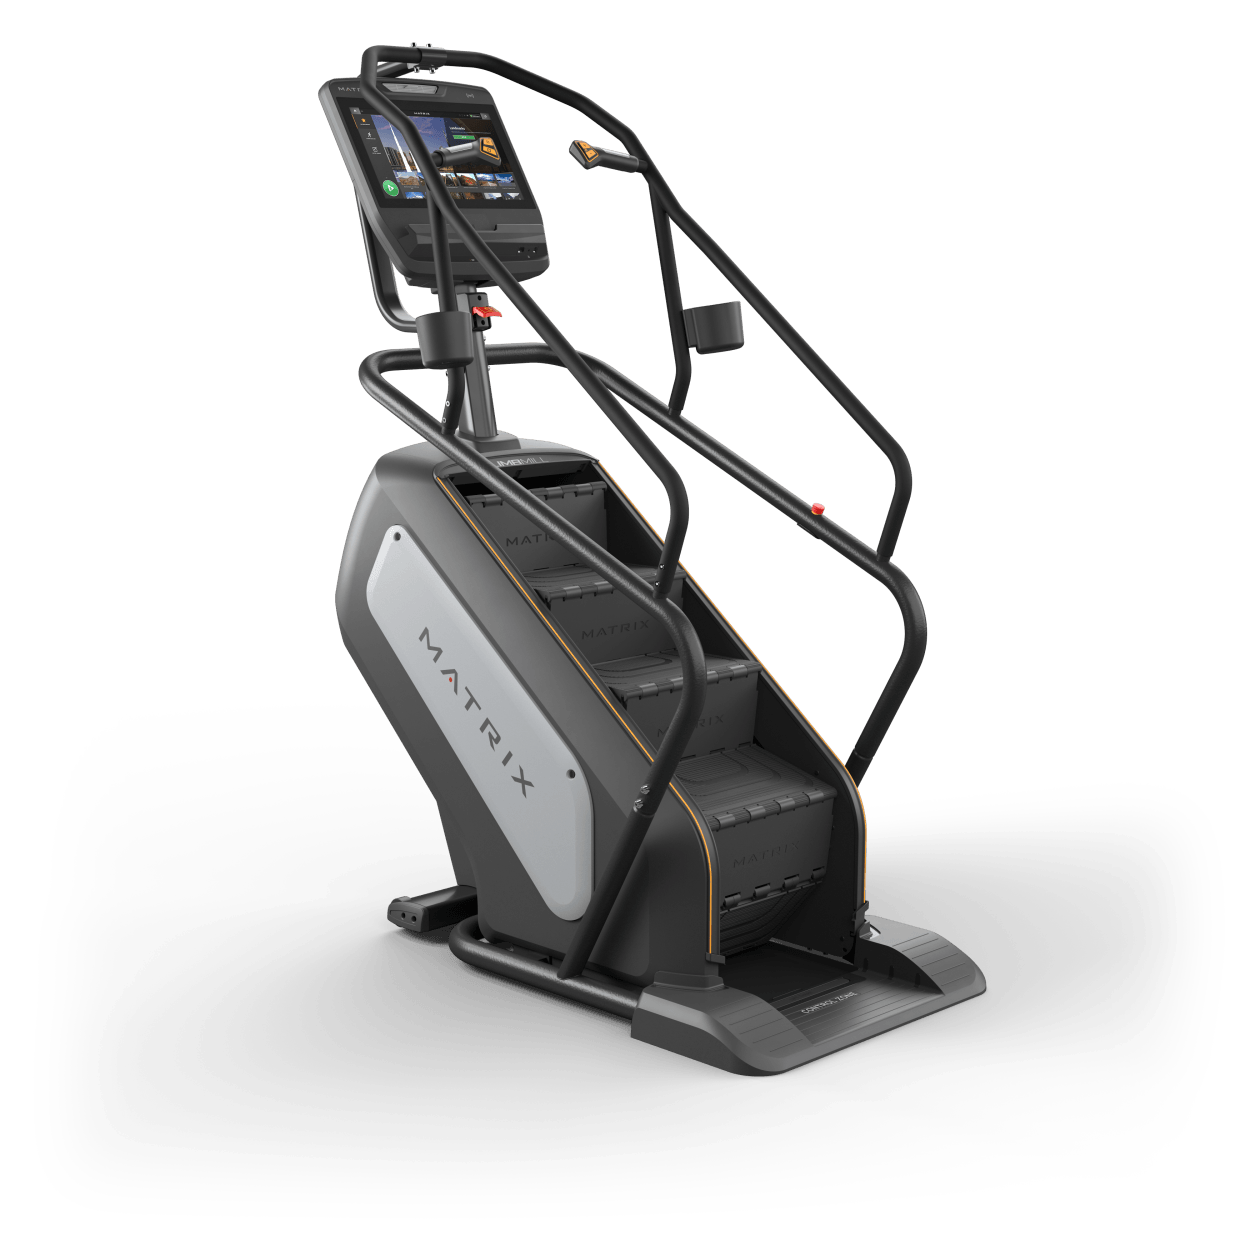 Matrix Fitness Performance Climbmill with Touch XL Console full view | Fitness Experience